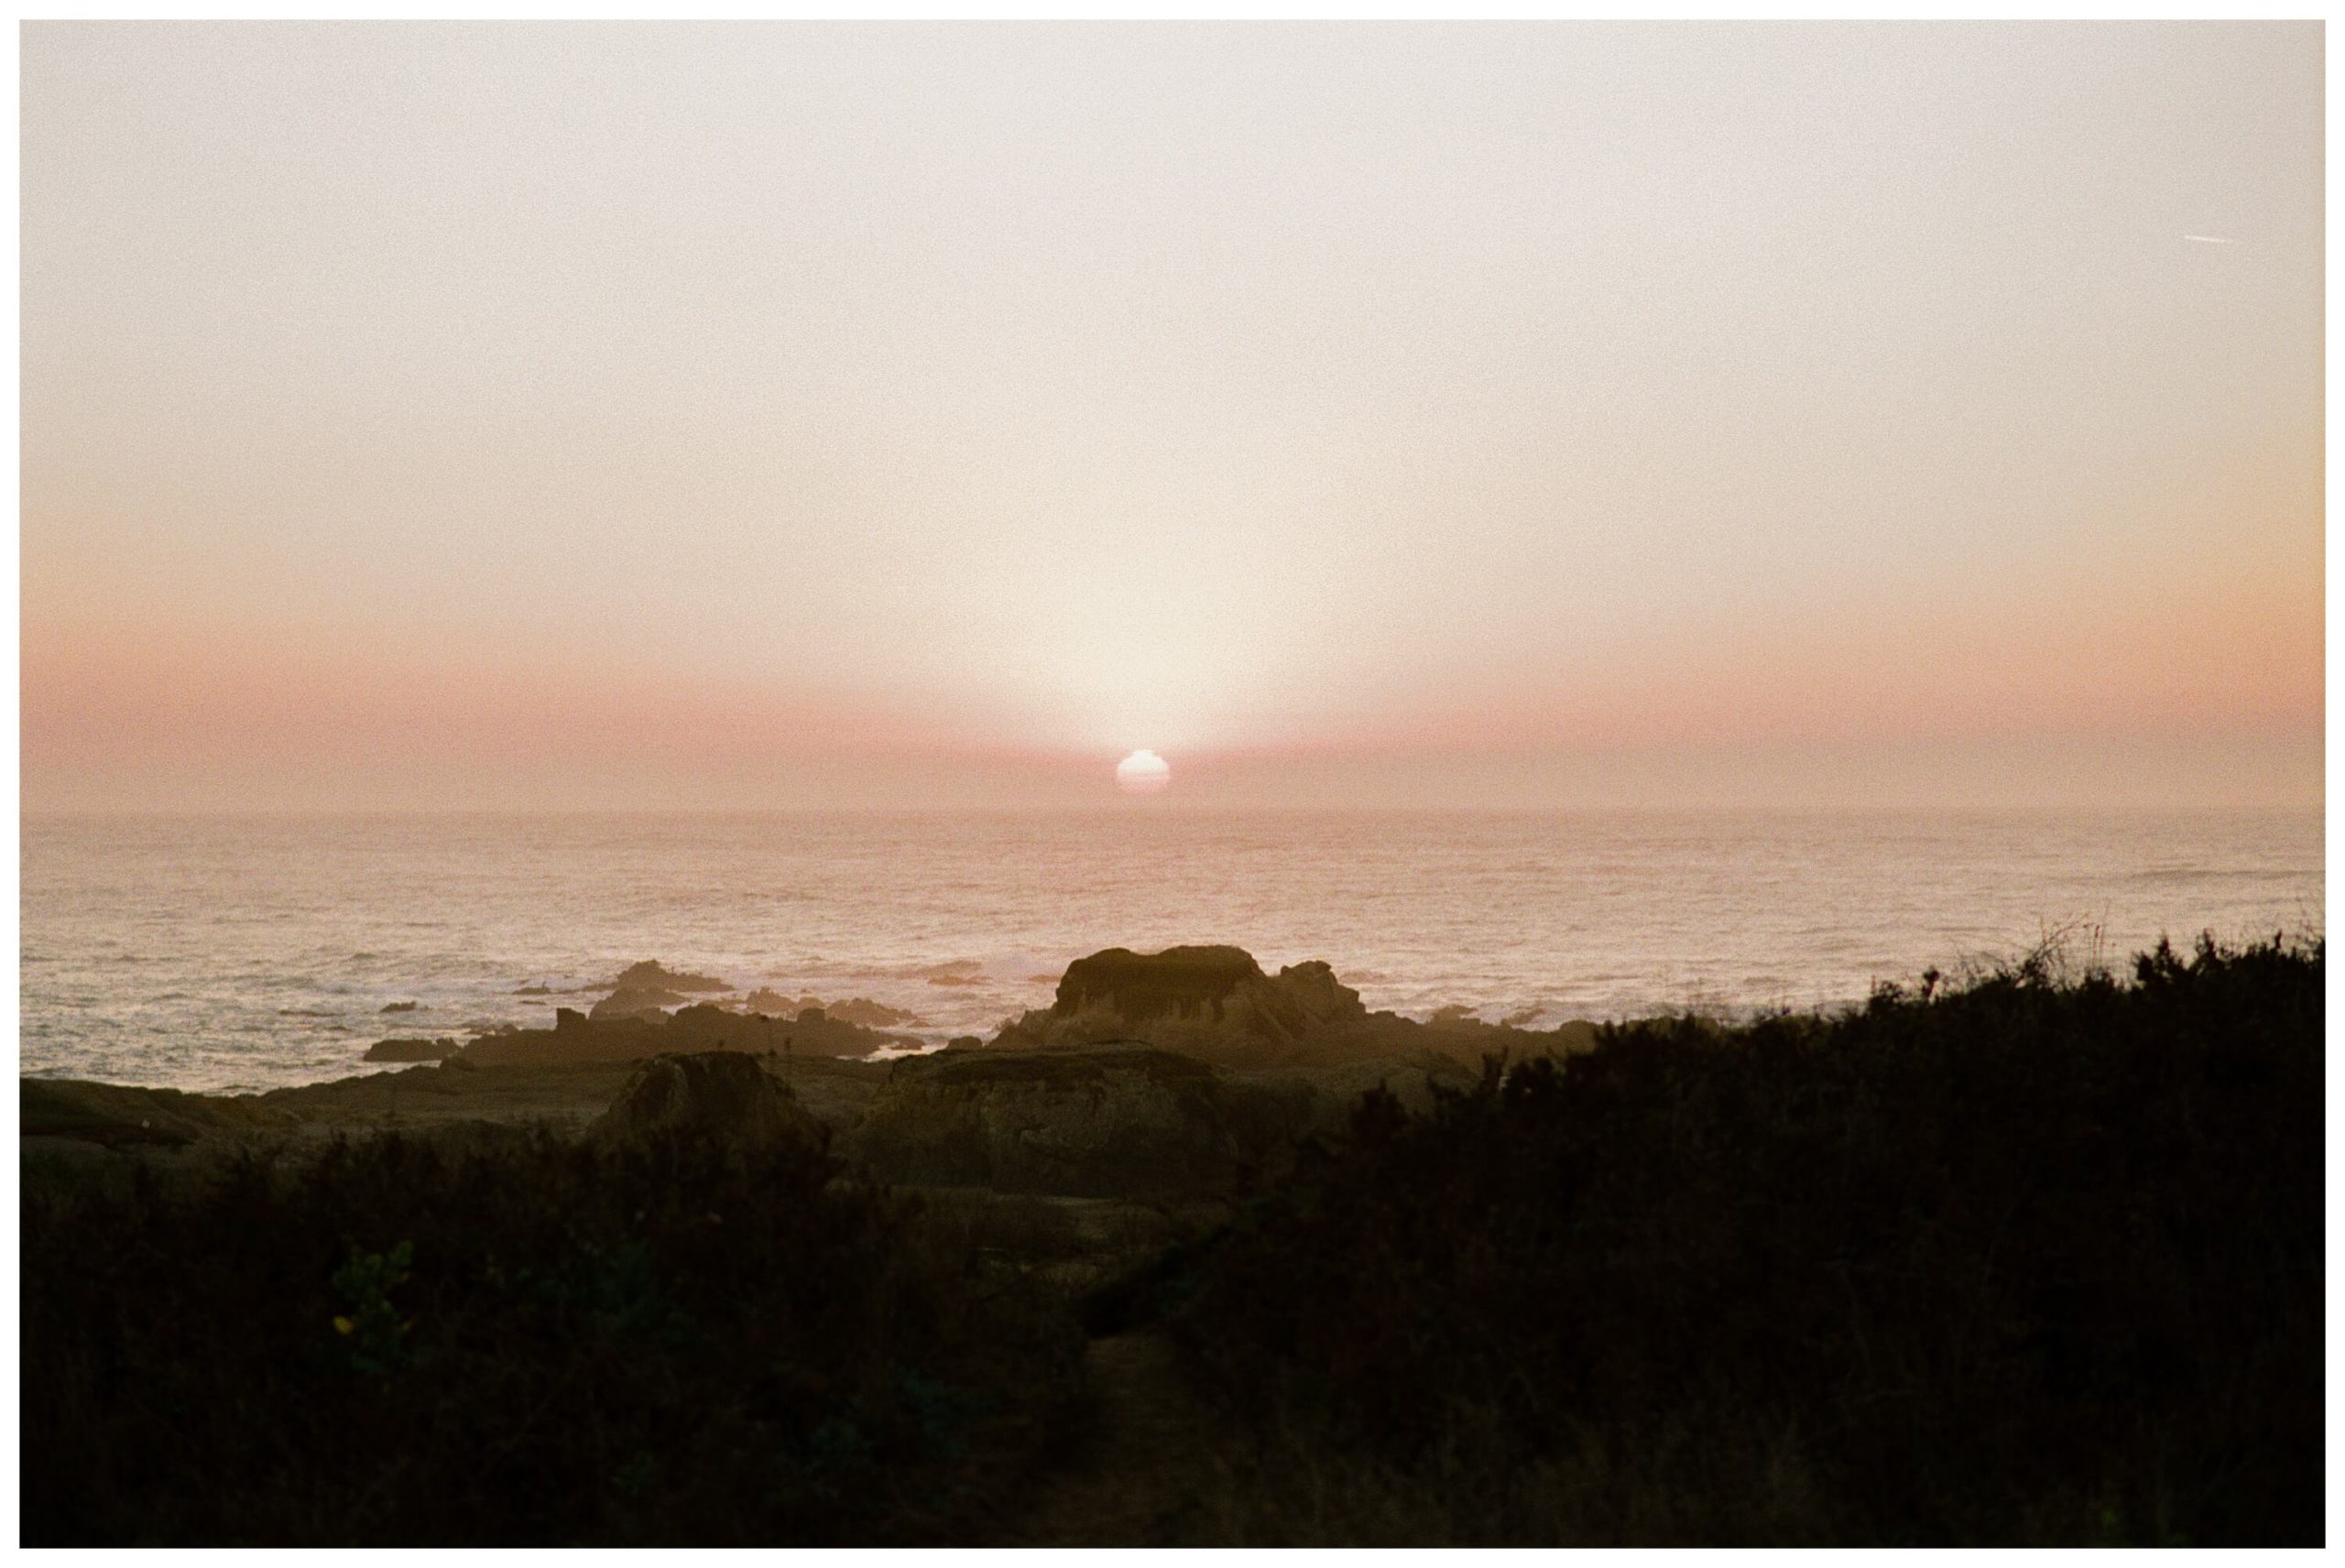 A sunset on Glass Beach in Fort Bragg, a northern California coastal town. The sky is hazy orange and red, making the sun appear exceptionally large.